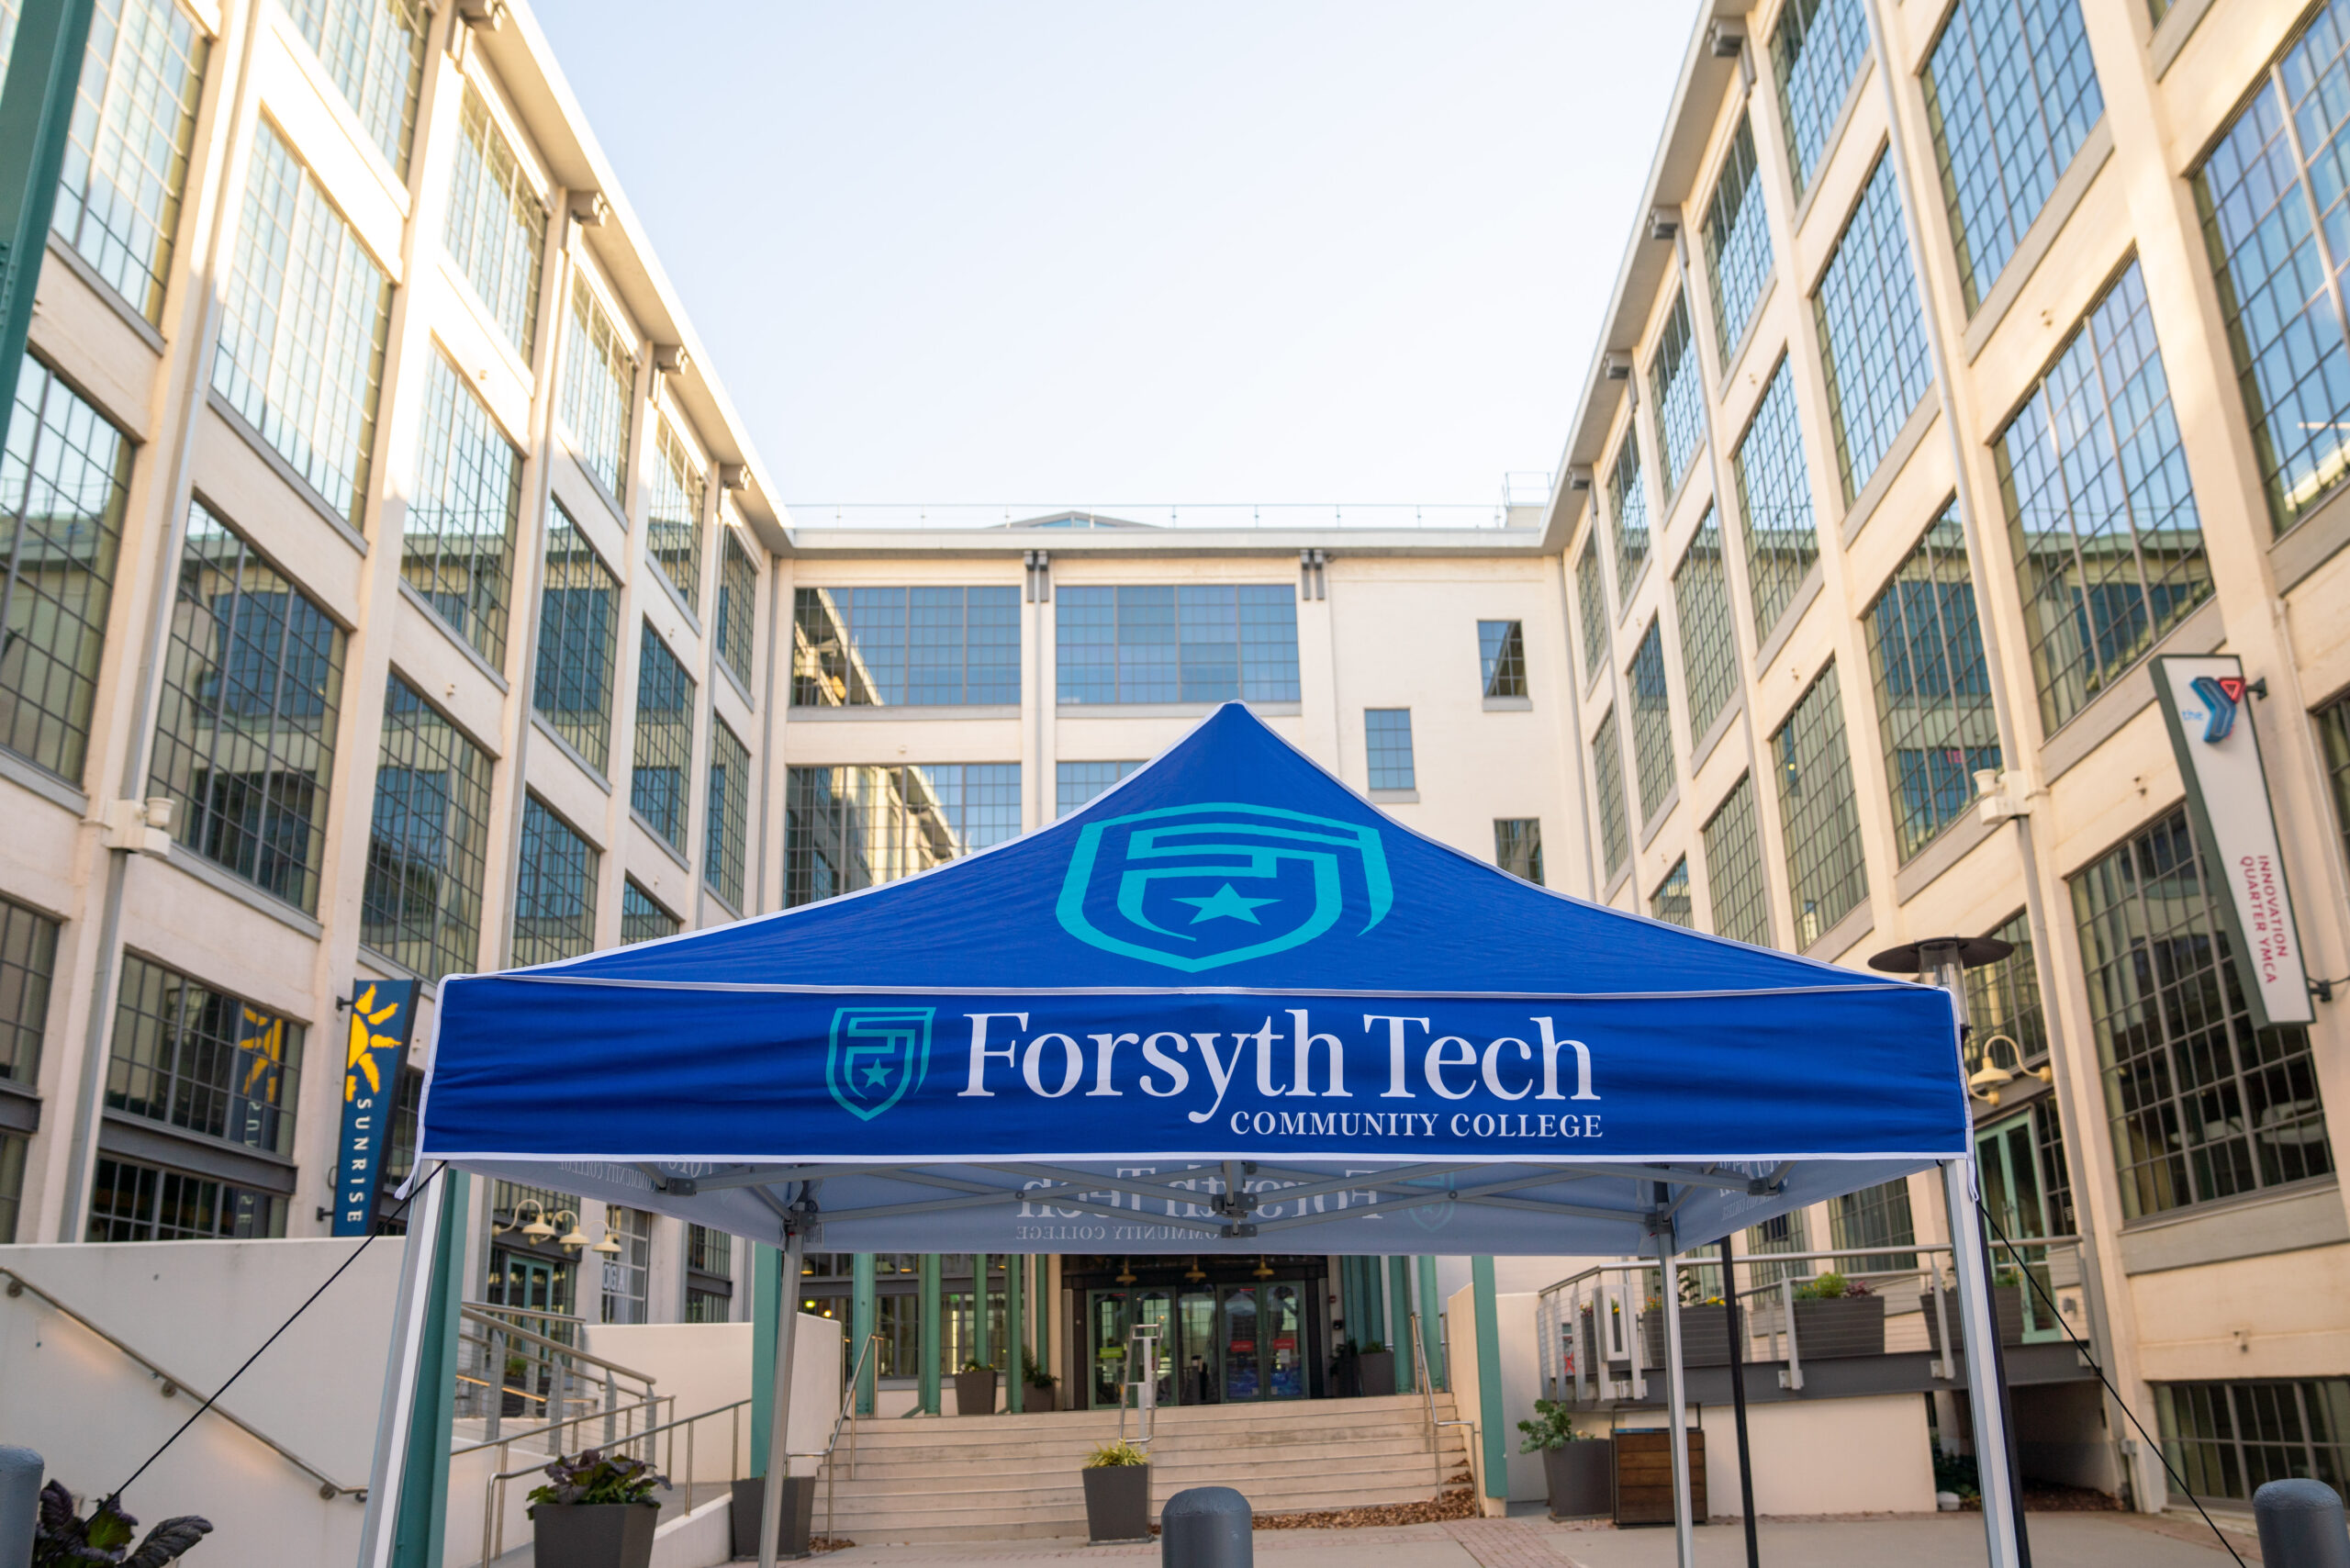 Small Business Center with Forsyth Tech tent in front